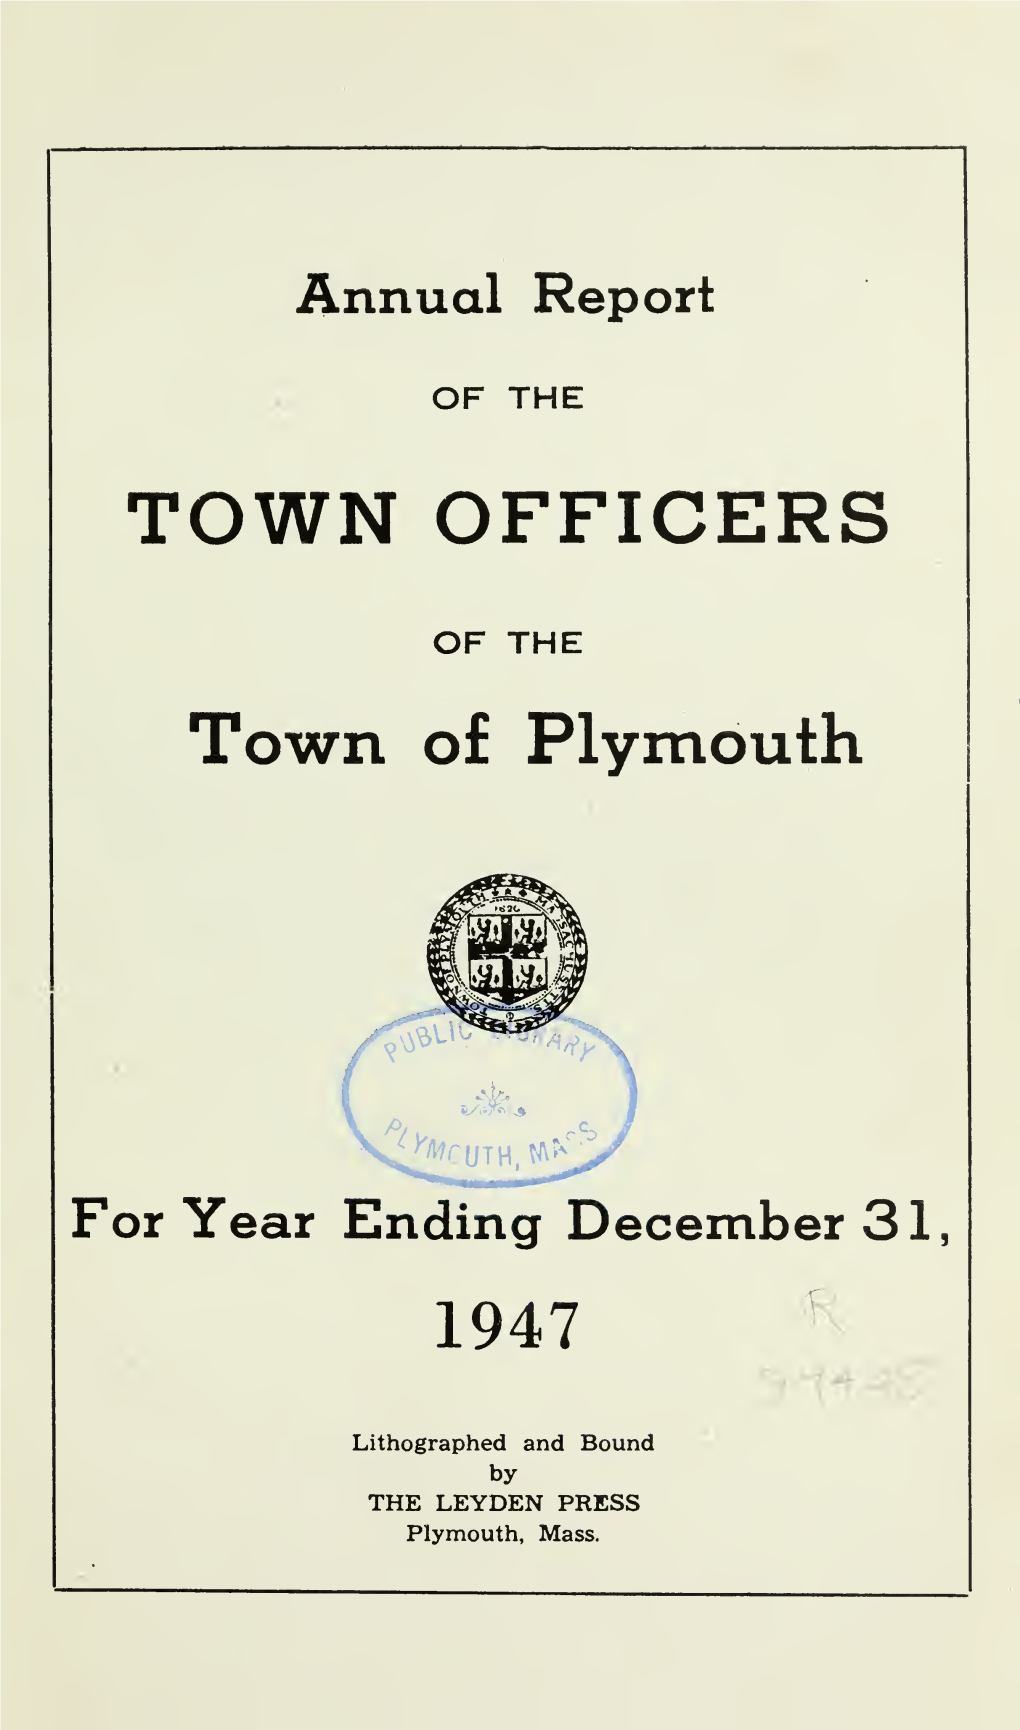 Annual Report of the Town of Plymouth, MA